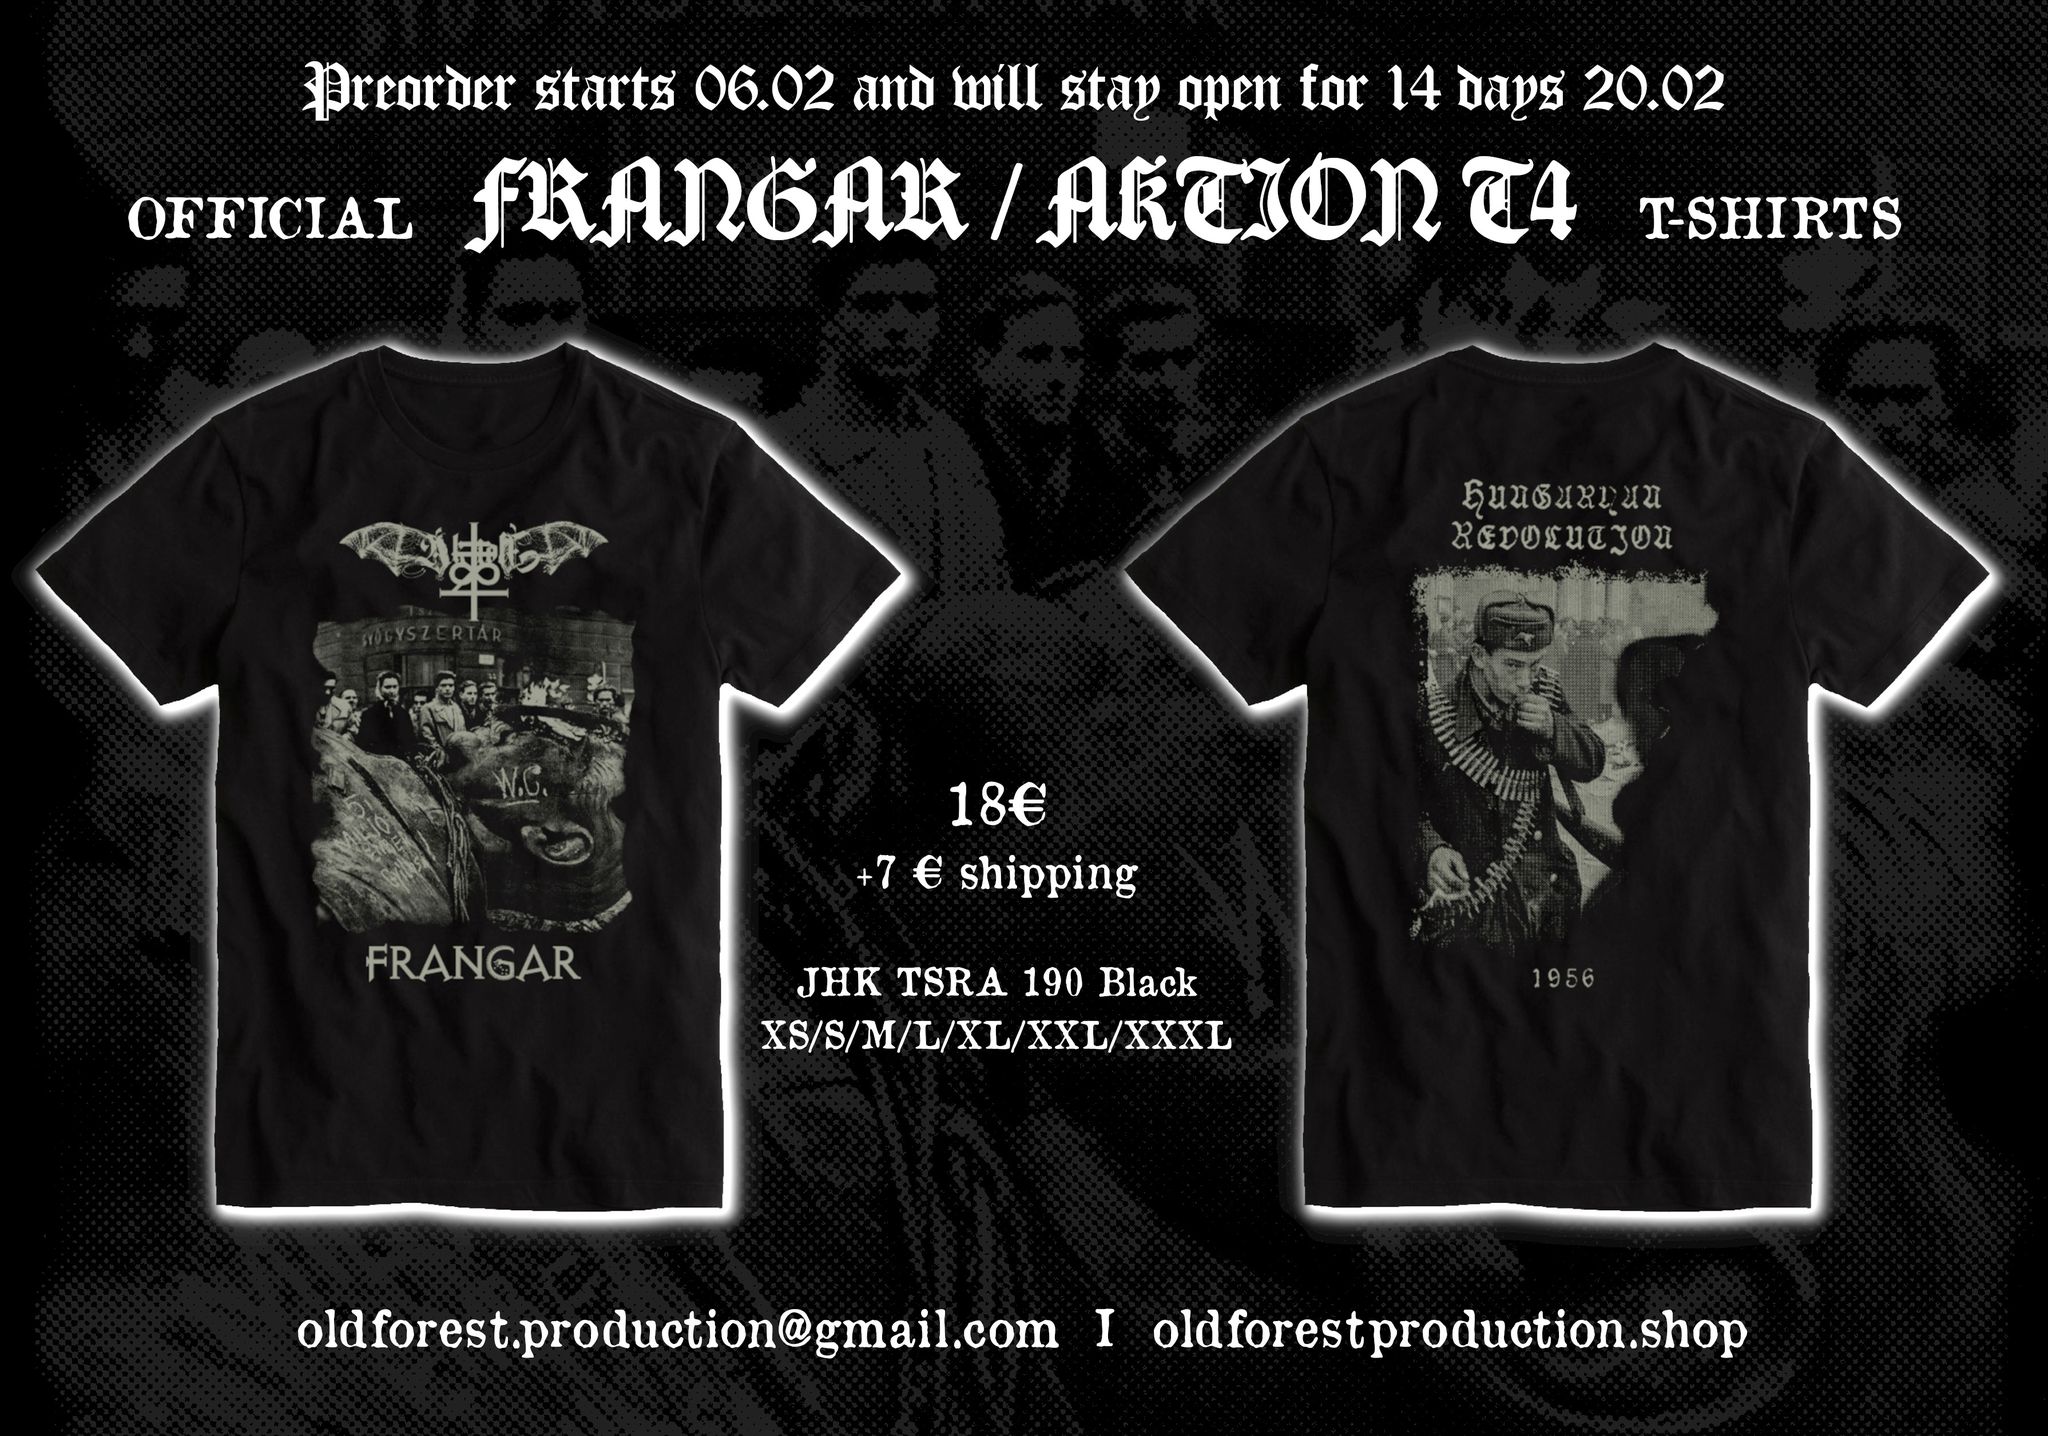 Aktion T4/Frangar official tshirt (last copies) - Old Forest Production image 1